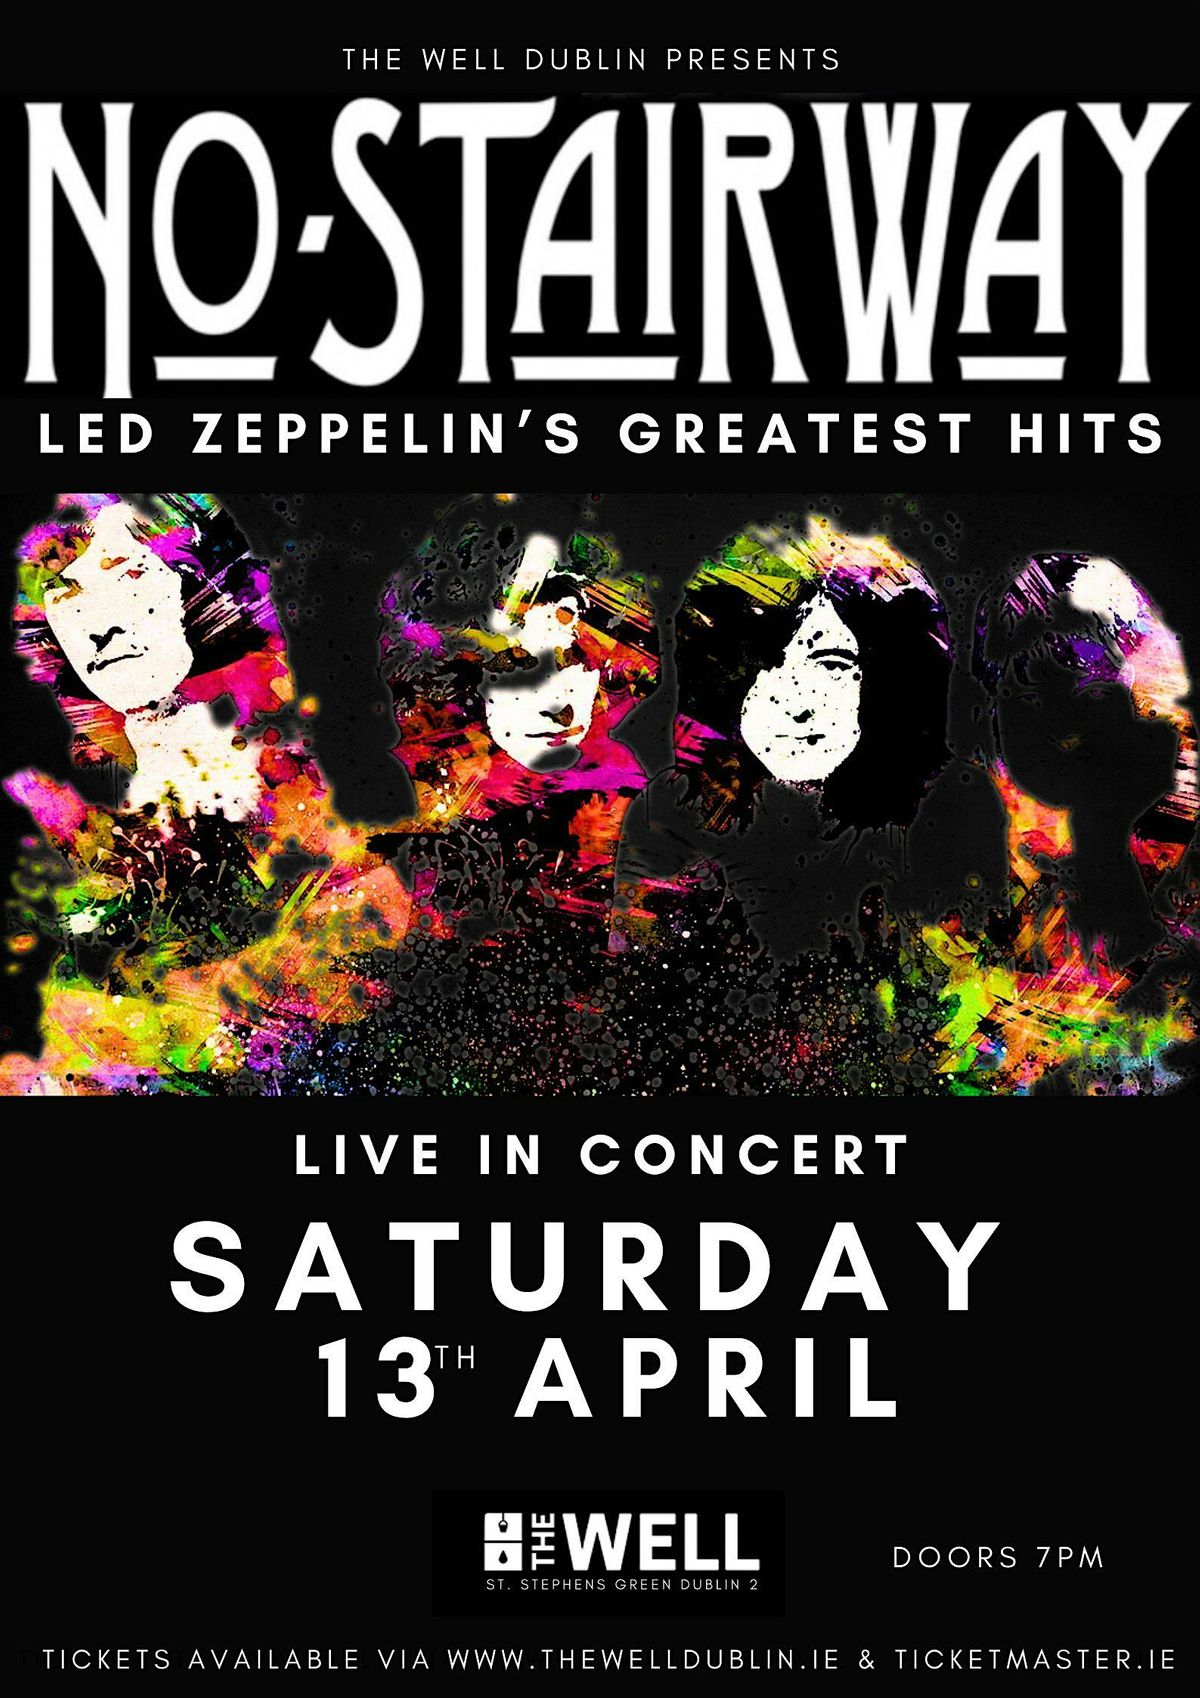 LED ZEPPELIN'S GREATEST HITS LIVE Feat: No Stairway